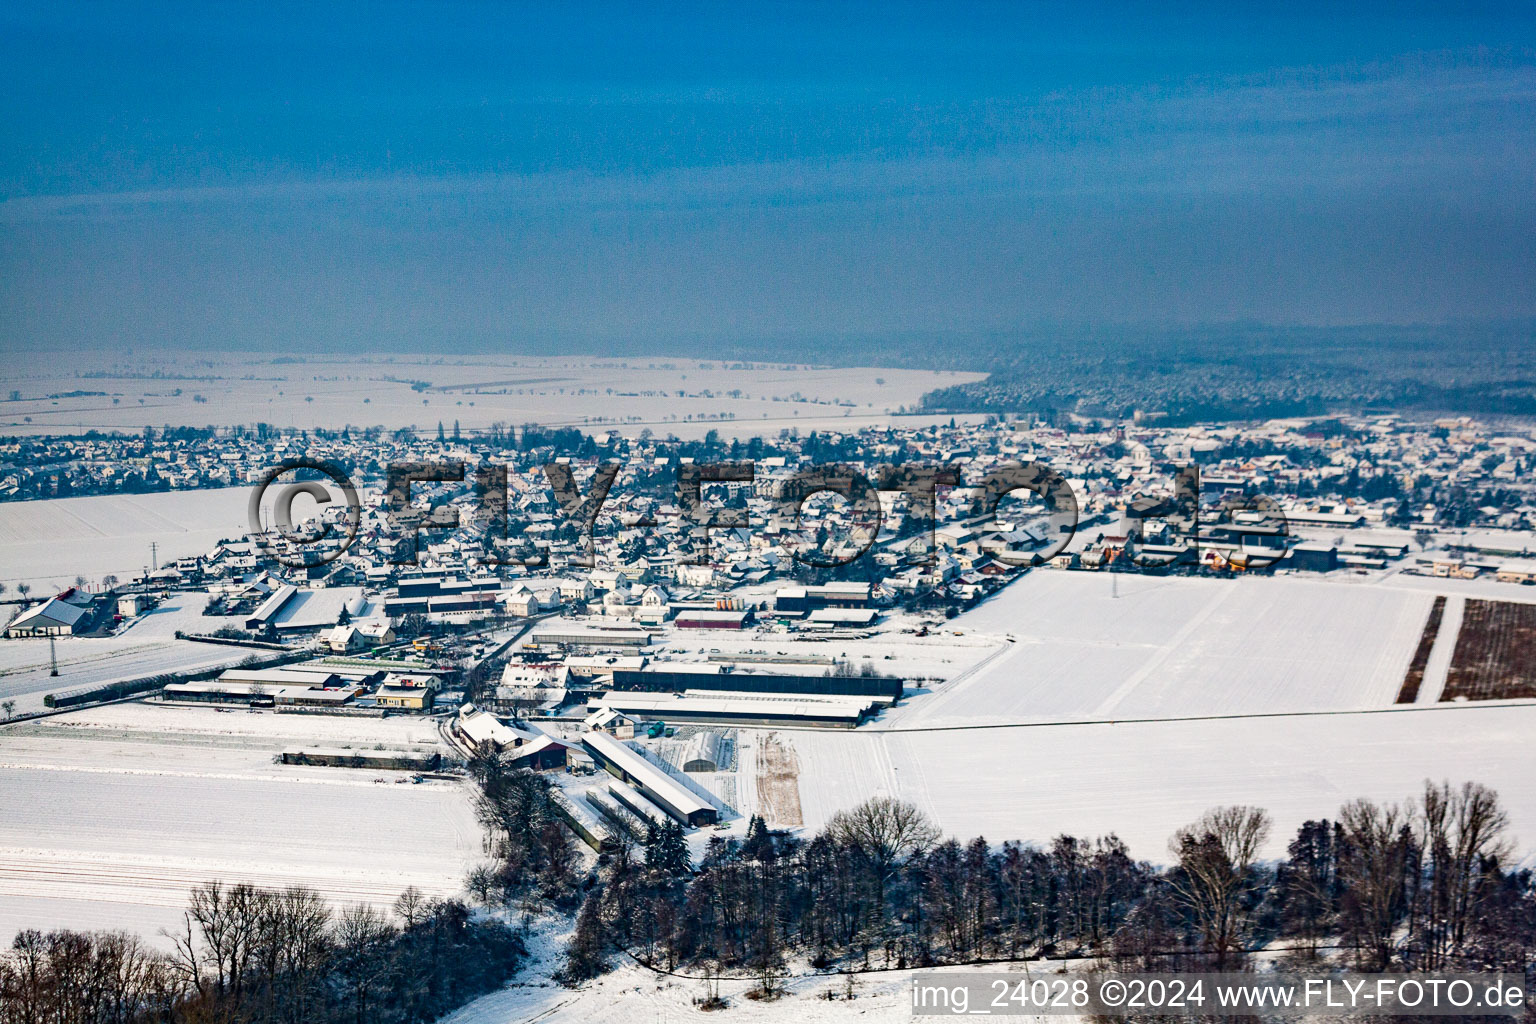 Wintry snowy Village - view on the edge of agricultural fields and farmland in Rheinzabern in the state Rhineland-Palatinate, Germany